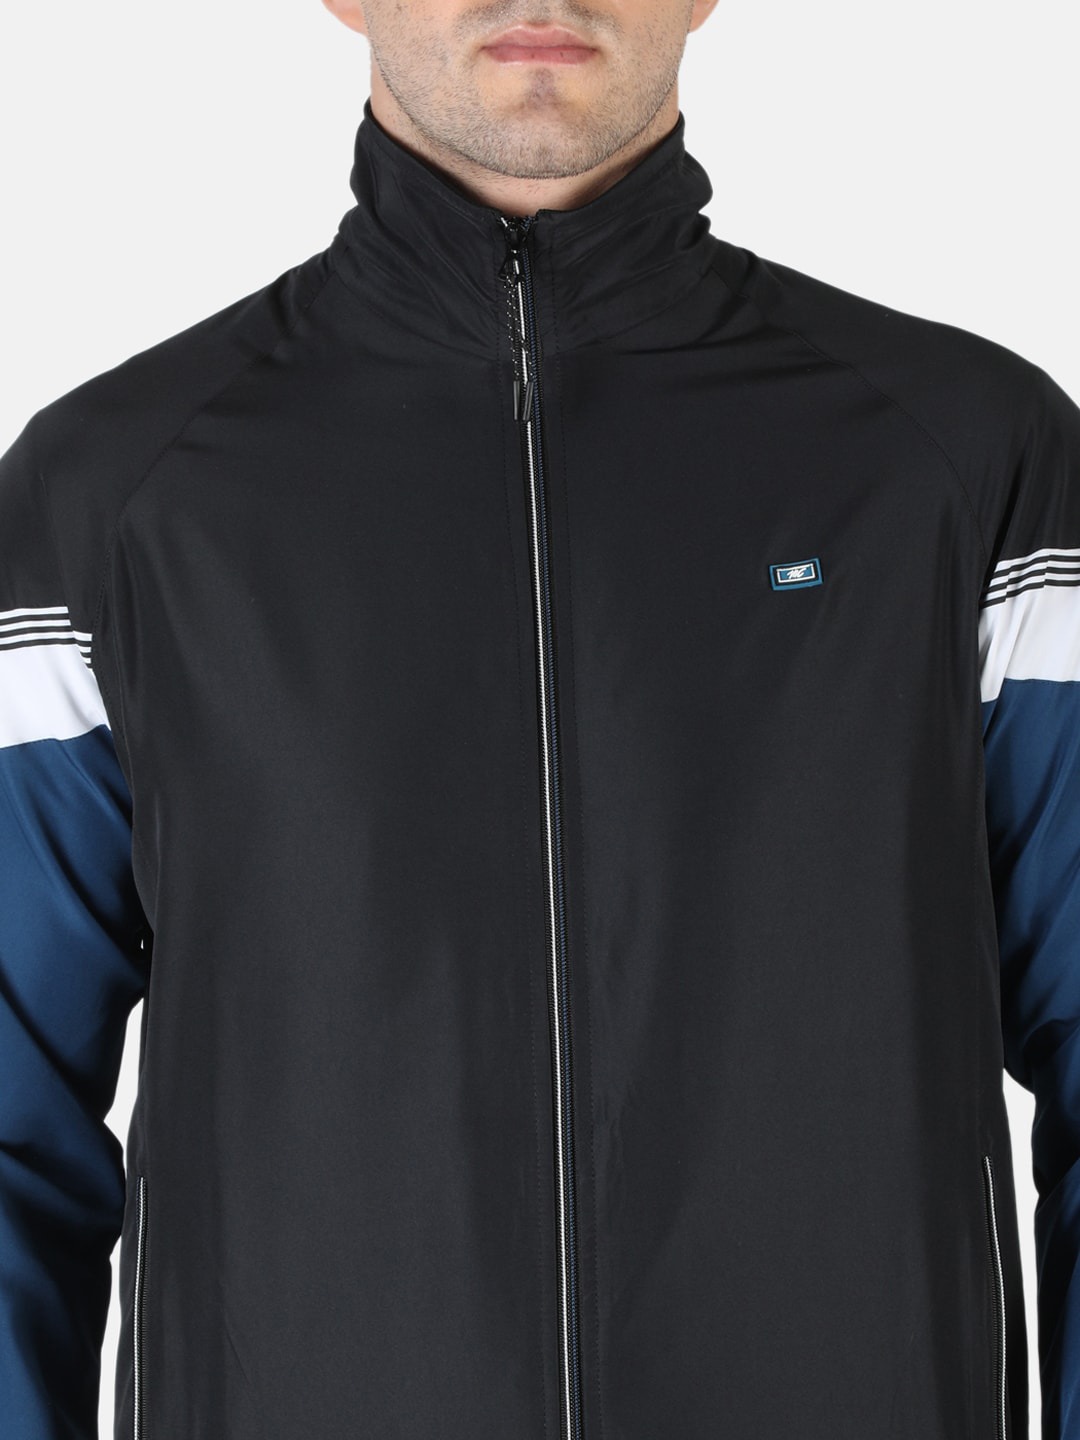 Clothing Tracksuits | Monte Carlo Men Black & Blue Colourblocked Tracksuits - RD41107